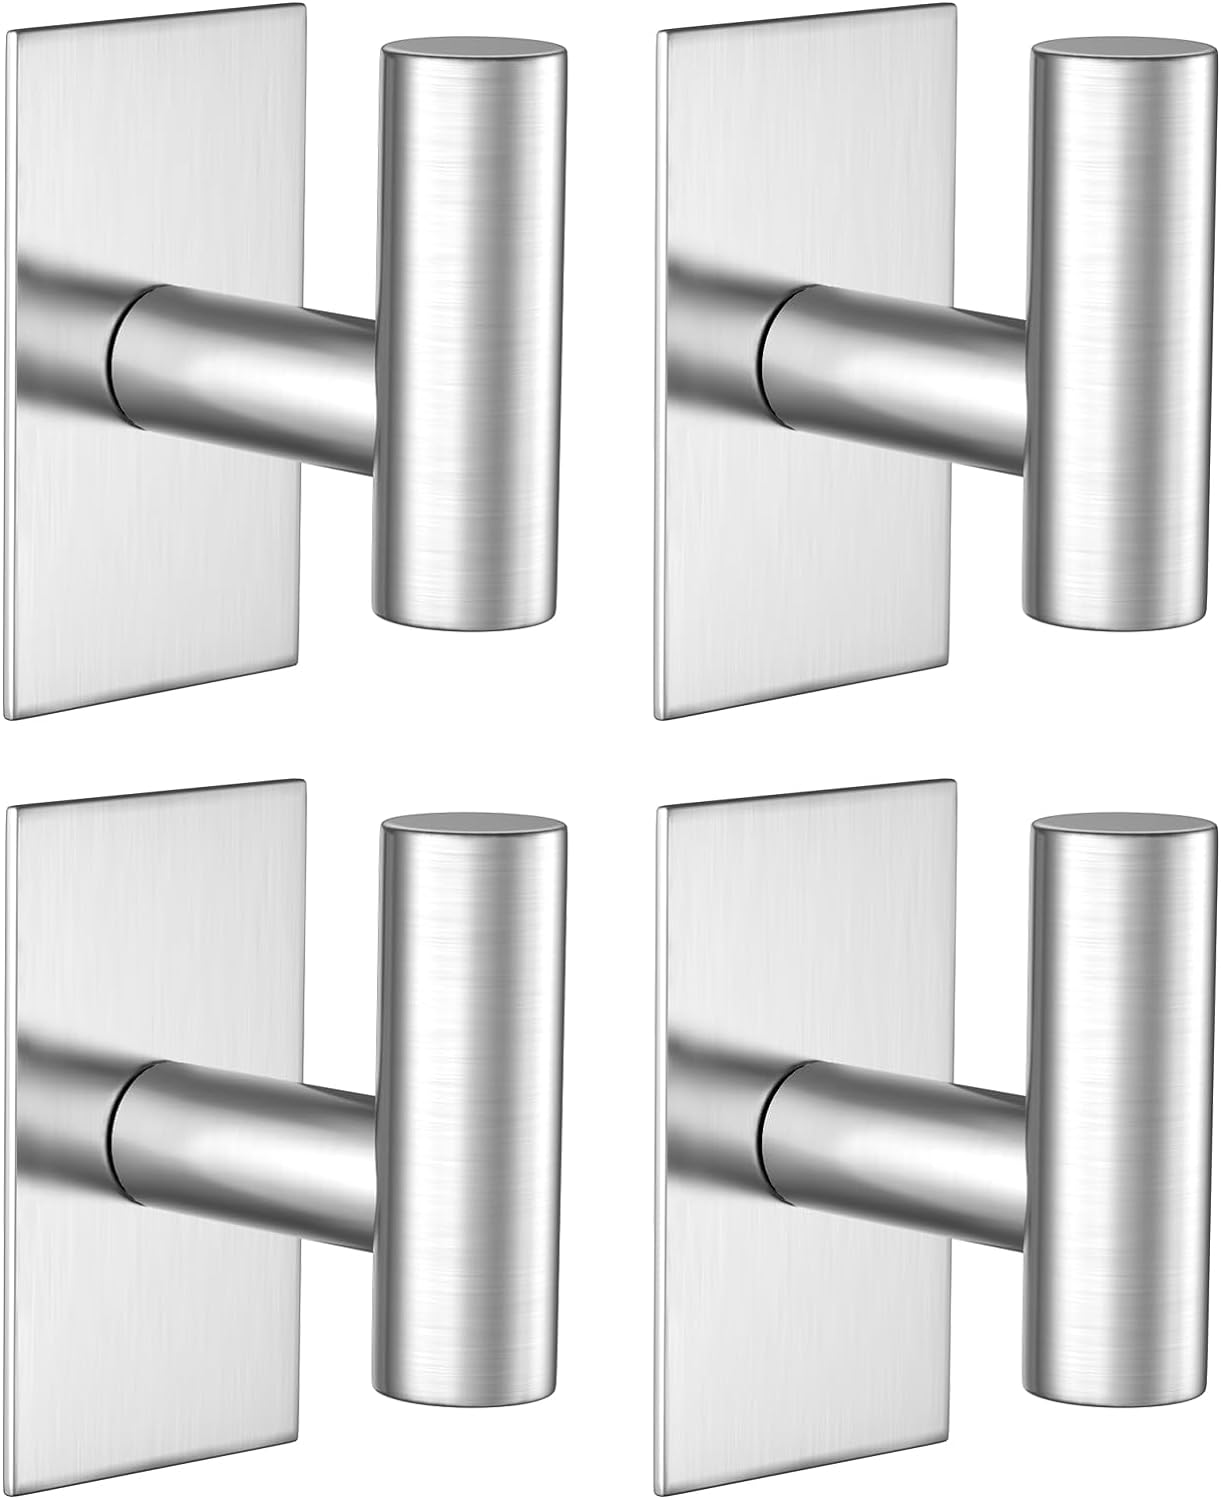 VAEHOLD Adhesive Hooks, Heavy Duty Wall Towel Hooks Stainless Steel Door Hooks for Hanging Coat, Hat, Towel, Robe, Key, Clothes, Closet Hook Wall Mount for Kitchen, Bathroom(Silver)